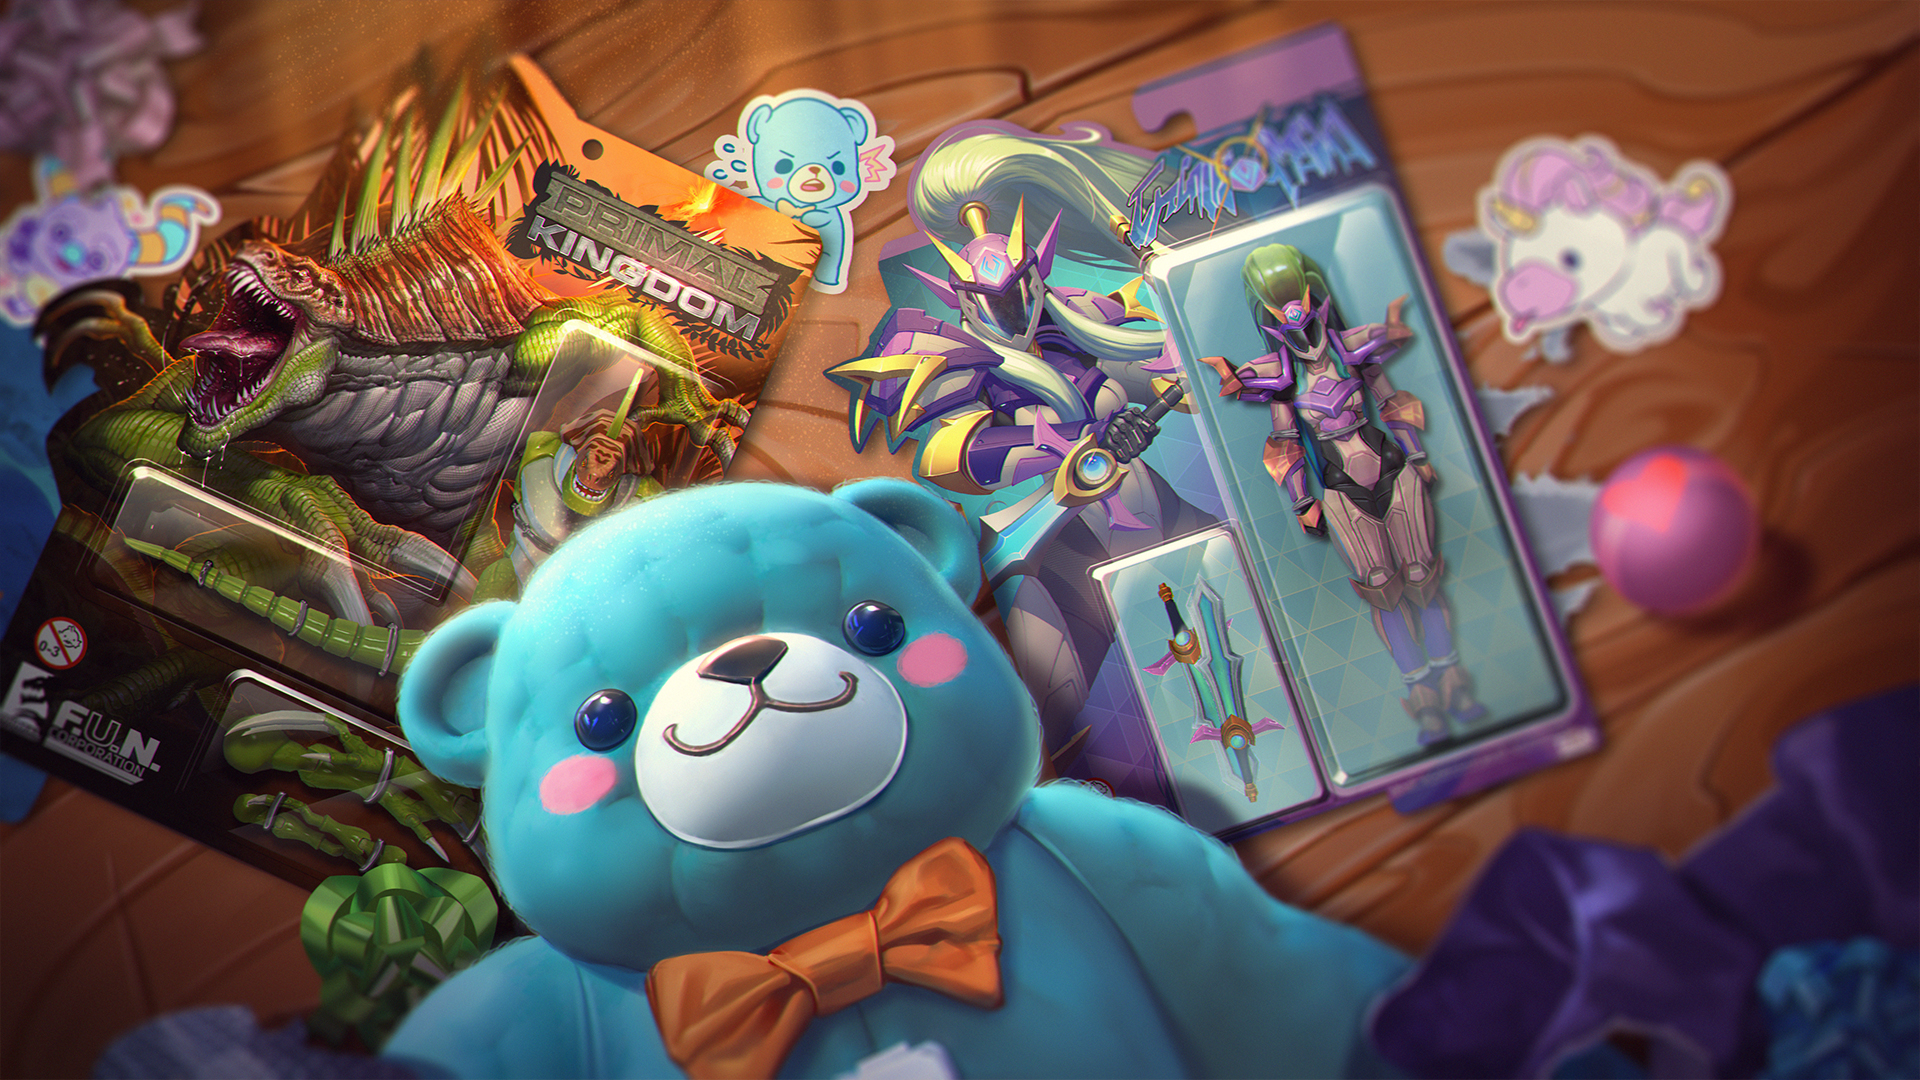 Toys Video Game Art Hots Heroes Of The Storm Video Game Characters Video Games Teddy Bears 1920x1080